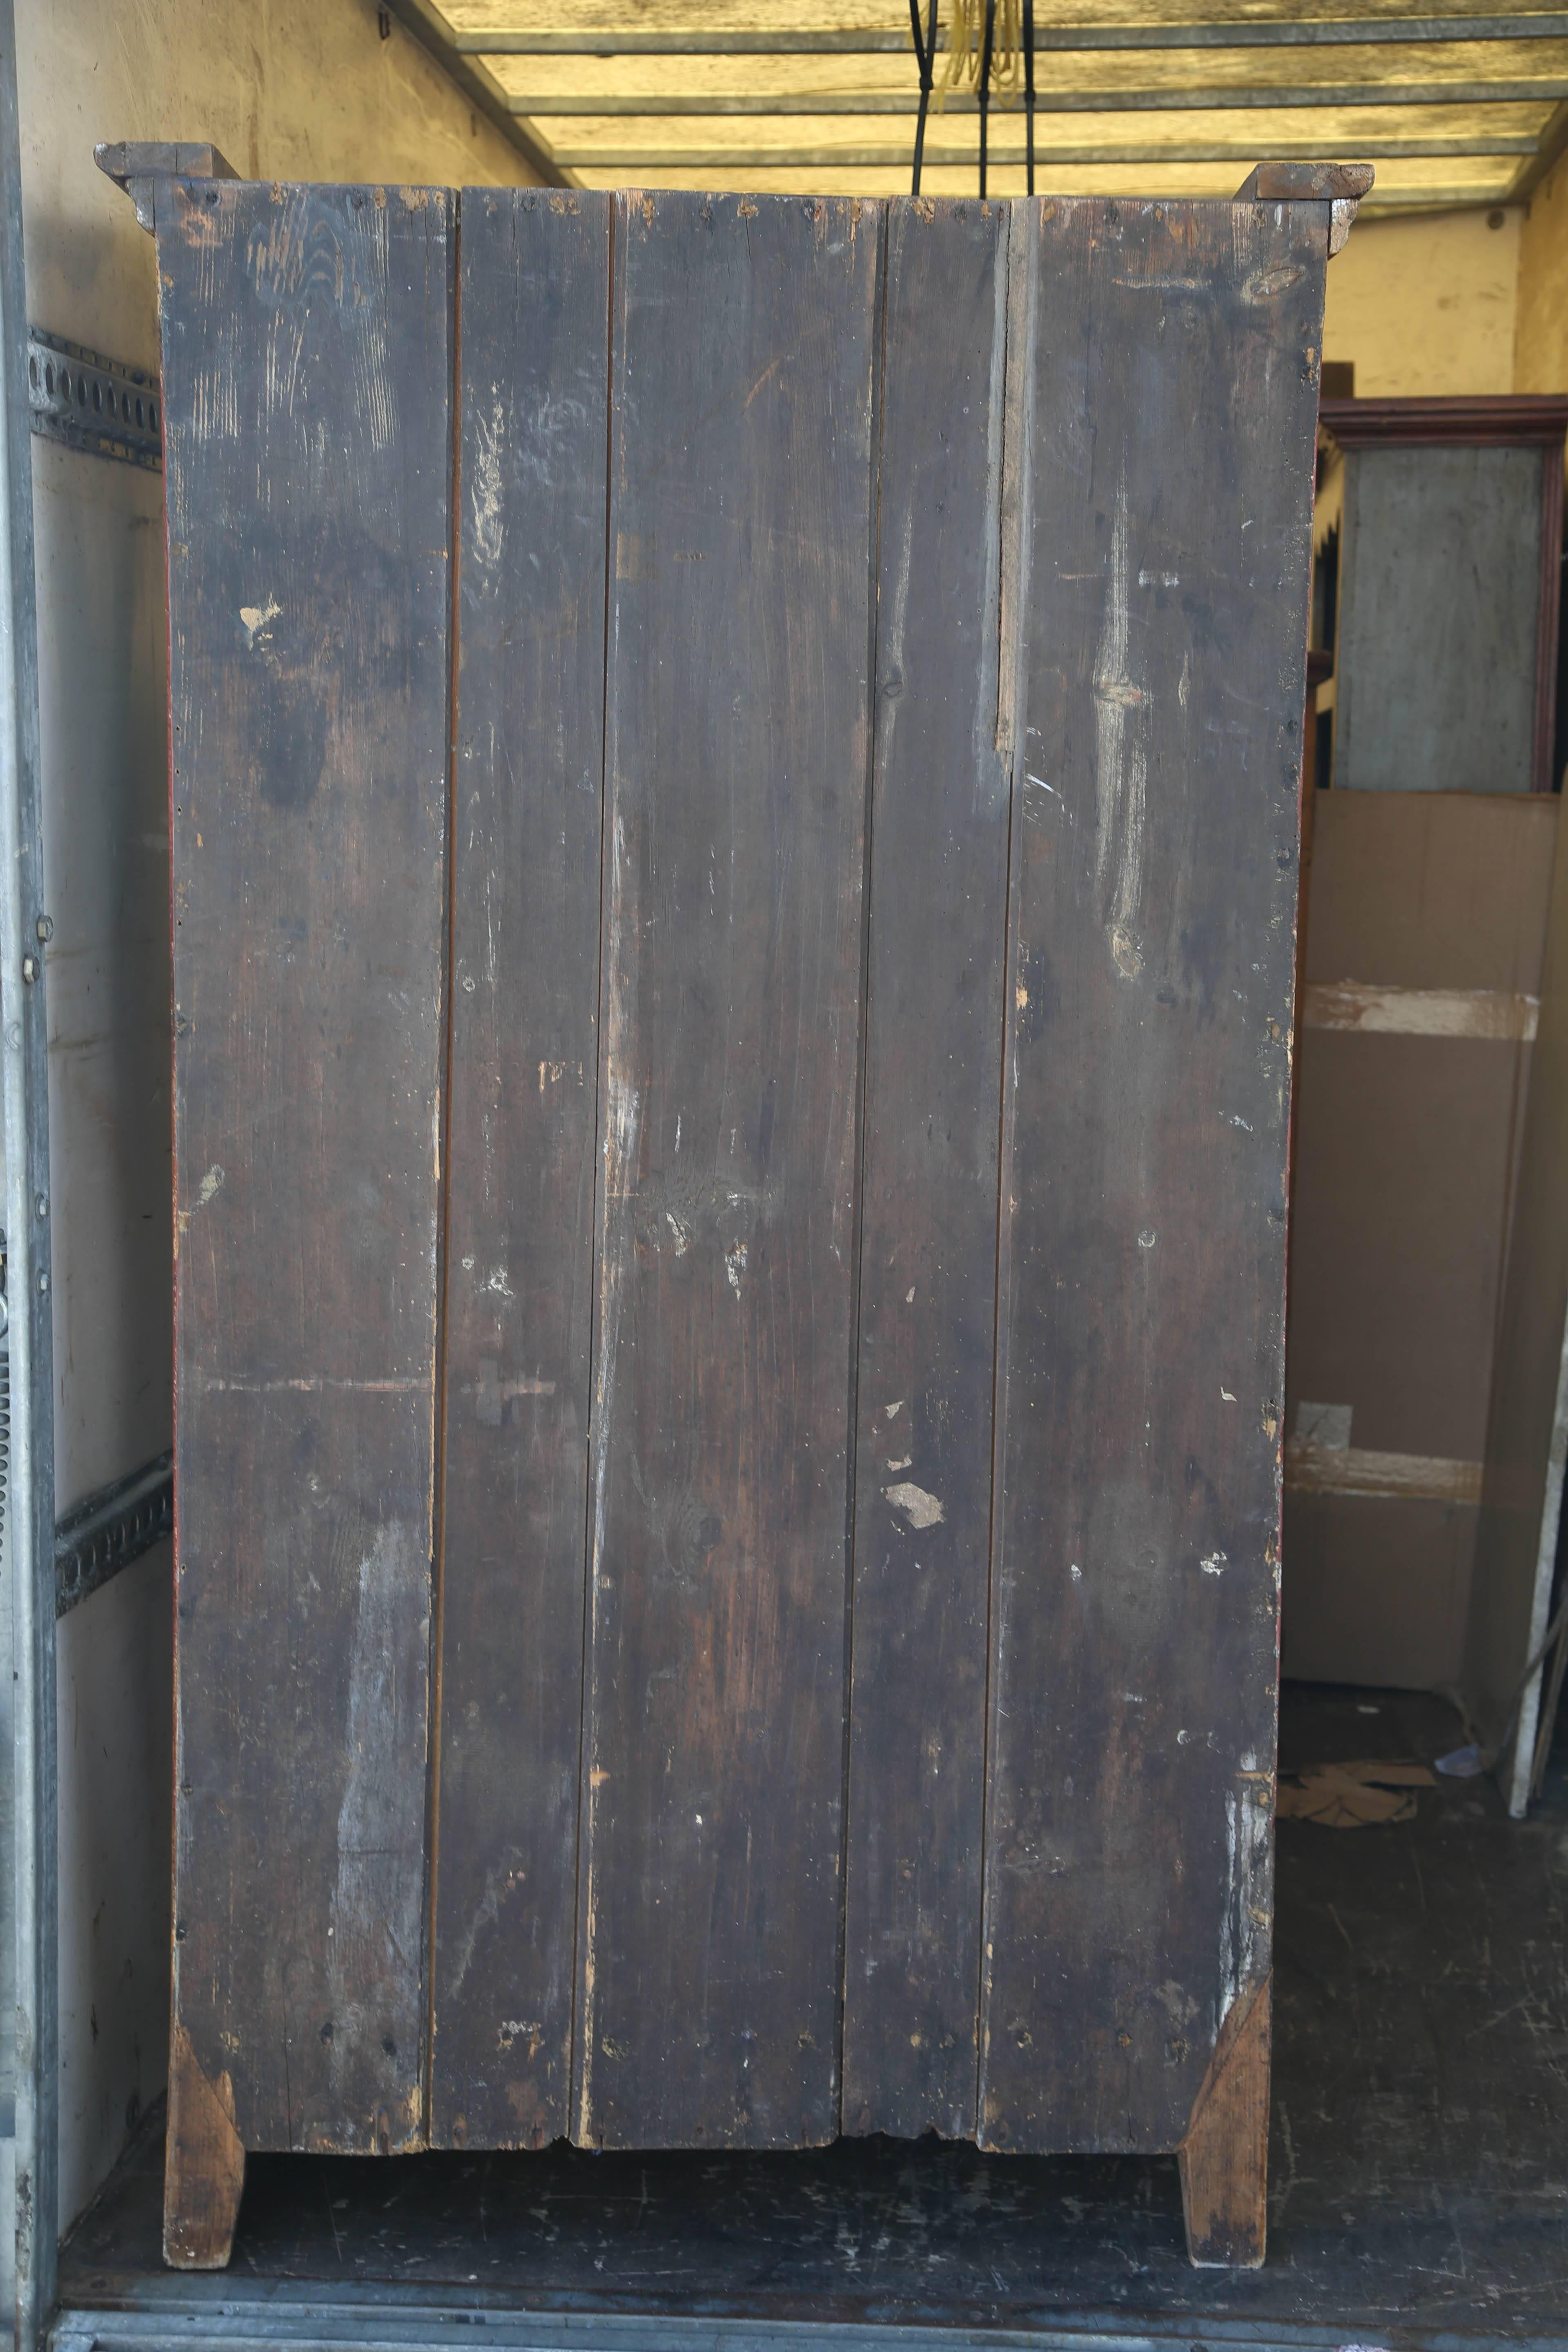 This is a very nice all original hand-painted single door armoire made in Italy in the early 1800s. Under the paintwork its solid pine, a great looking decorative piece of furniture which could be used in any room. The paintwork is in very good